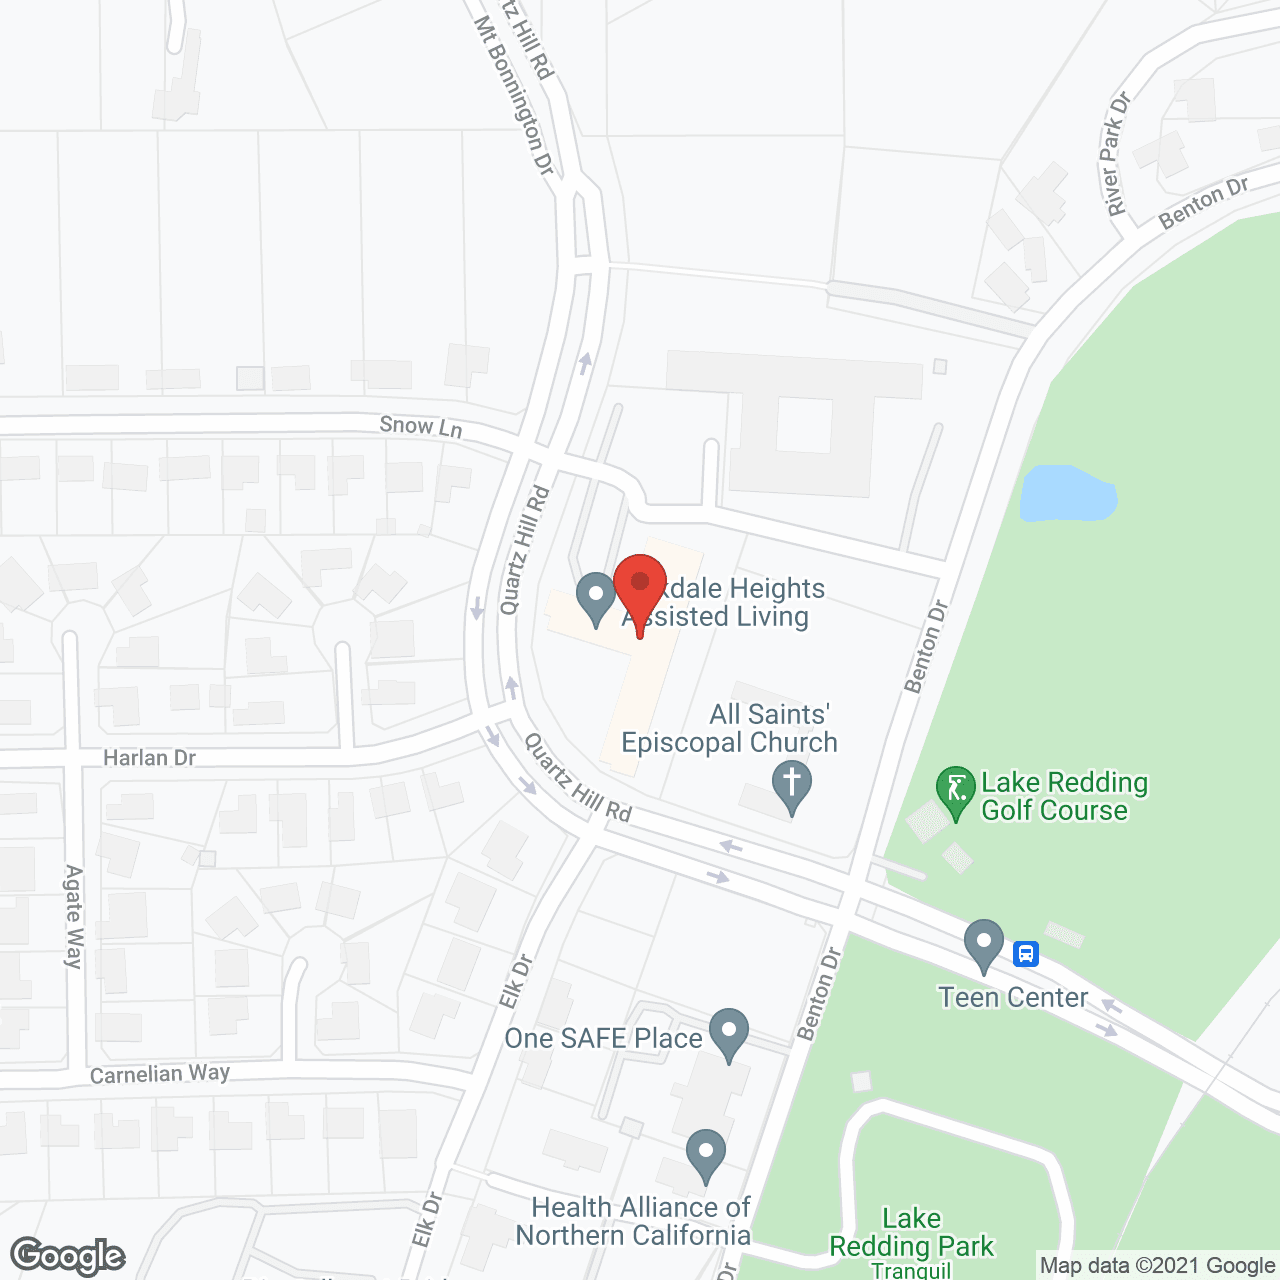 Oakdale Heights Assisted Living in google map